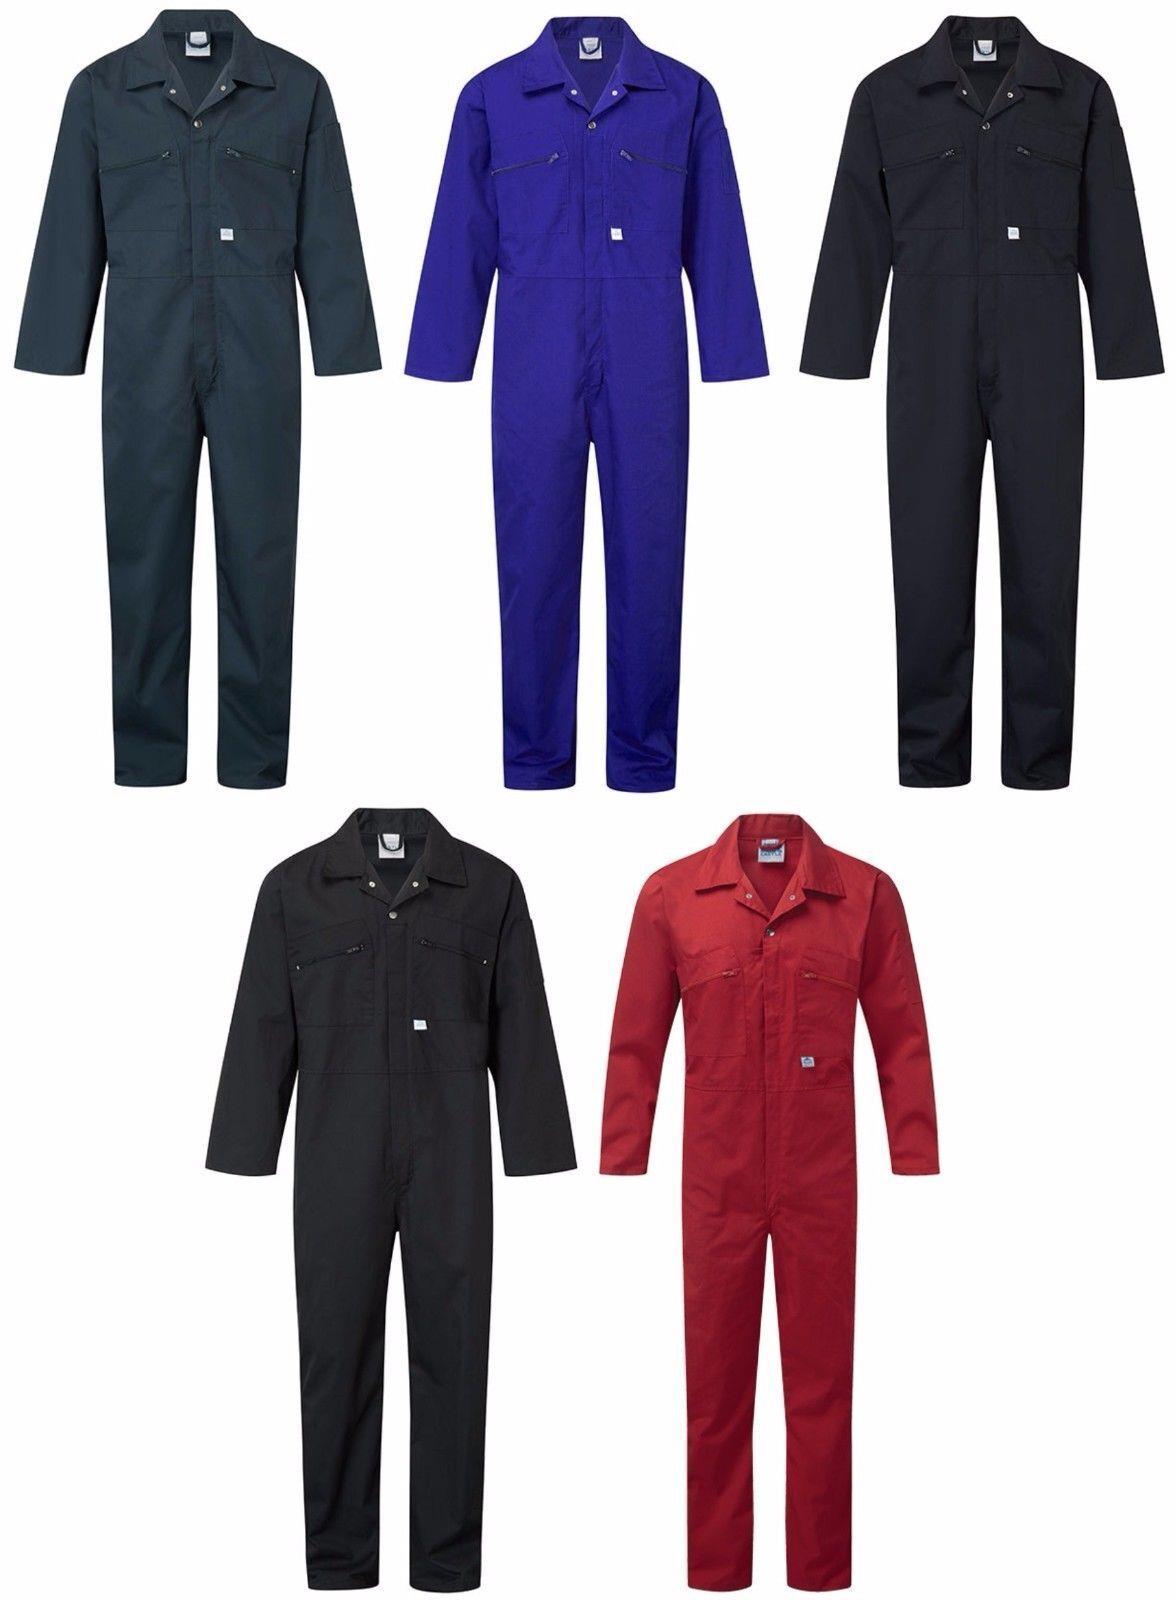 Fort zip-front boilersuit heavy-duty 240g polycotton multi-pocket coverall #366